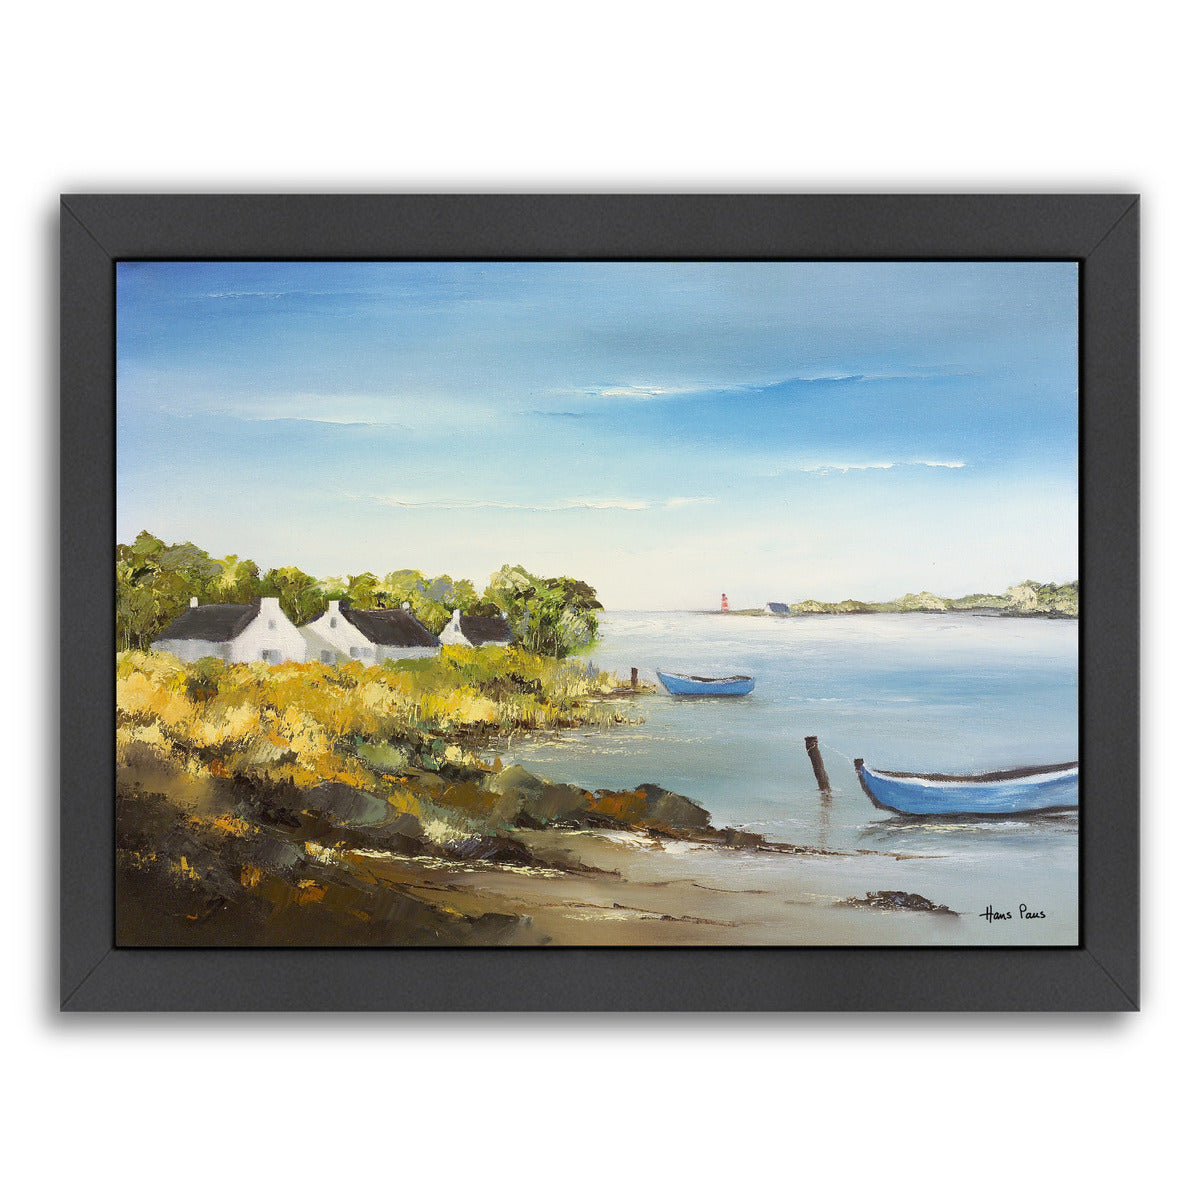 Houses With Boats By Hans Paus - Black Framed Print - Wall Art - Americanflat